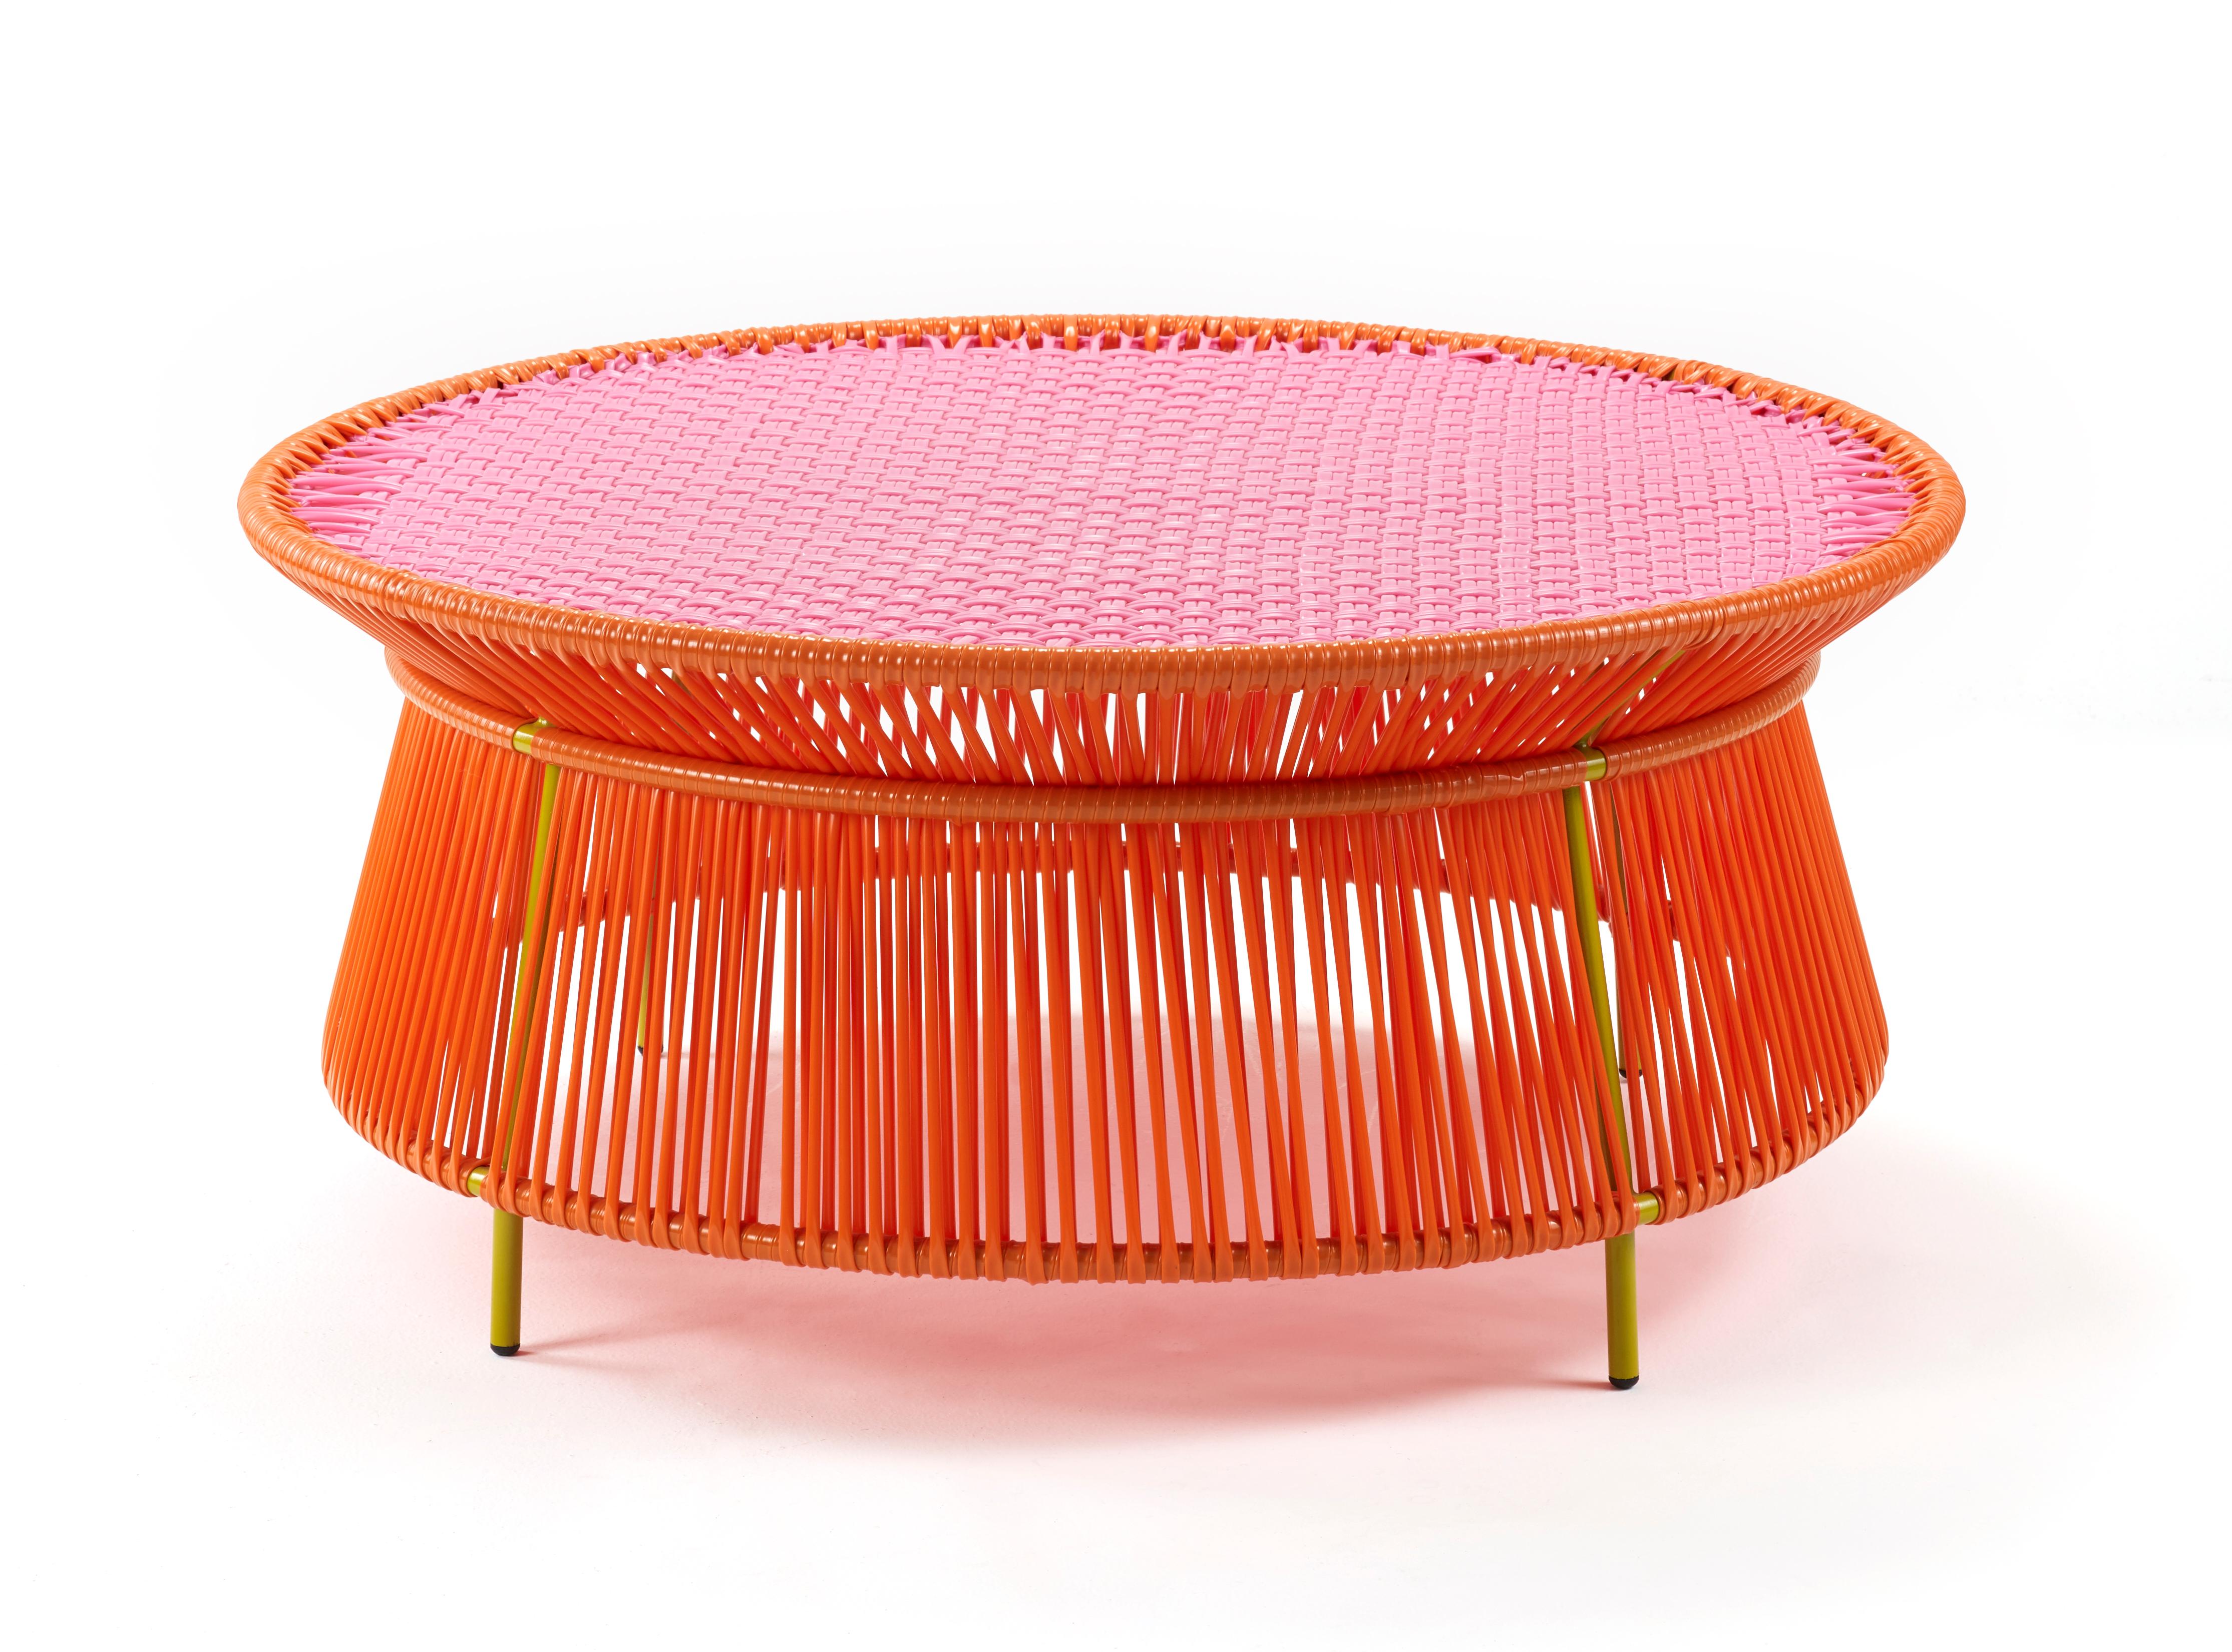 Orange rose Caribe low table by Sebastian Herkner
Materials: Galvanized and powder-coated tubular steel. PVC strings are made from recycled plastic.
Technique: Made from recycled plastic and weaved by local craftspeople in Colombia. 
Dimensions: